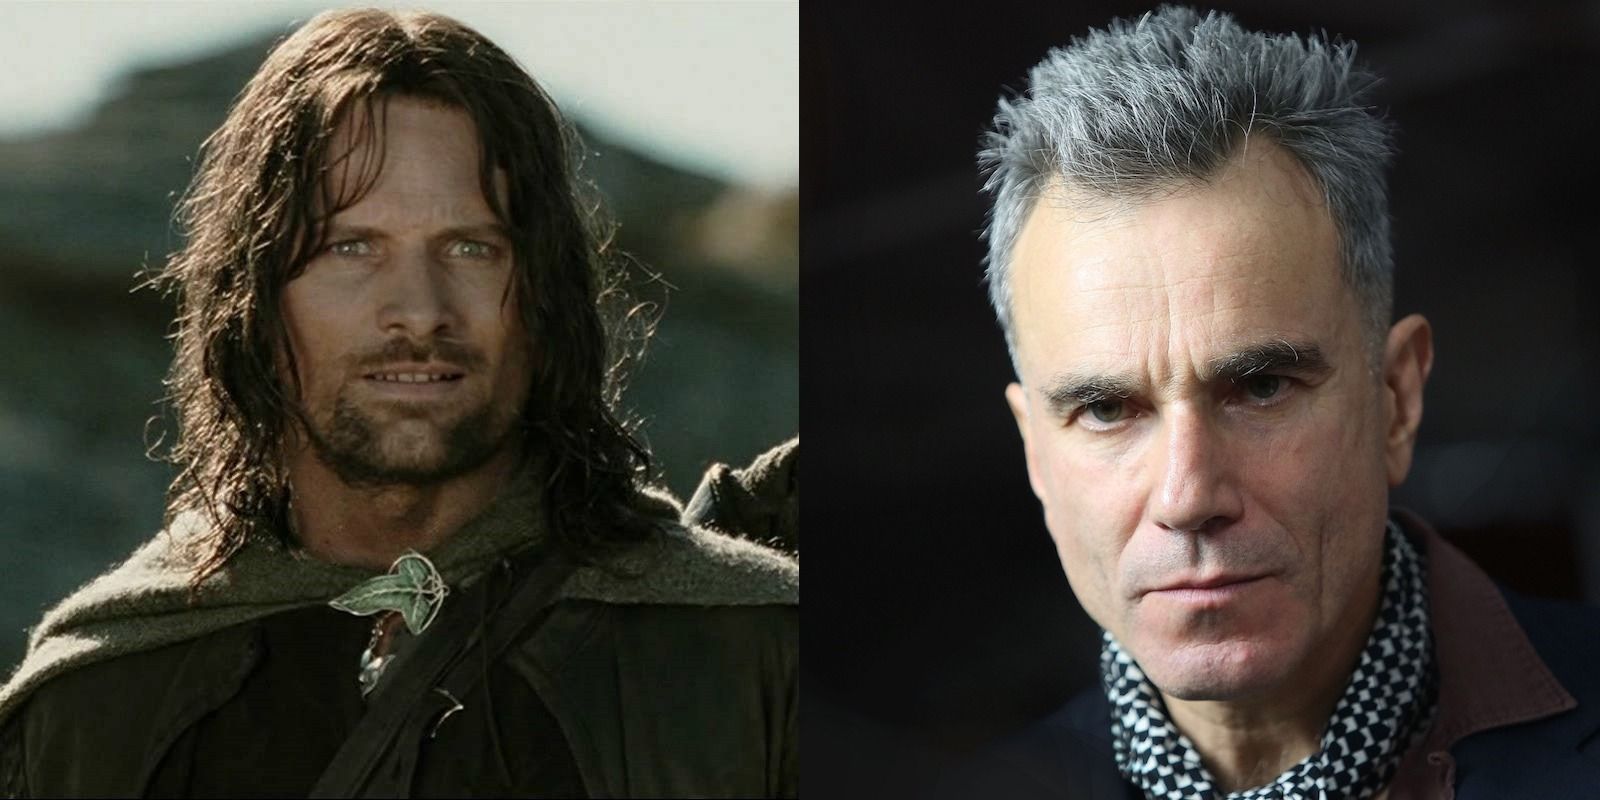 Lord Of The Rings: 10 Middle-Earth-Related Facts About The Cast